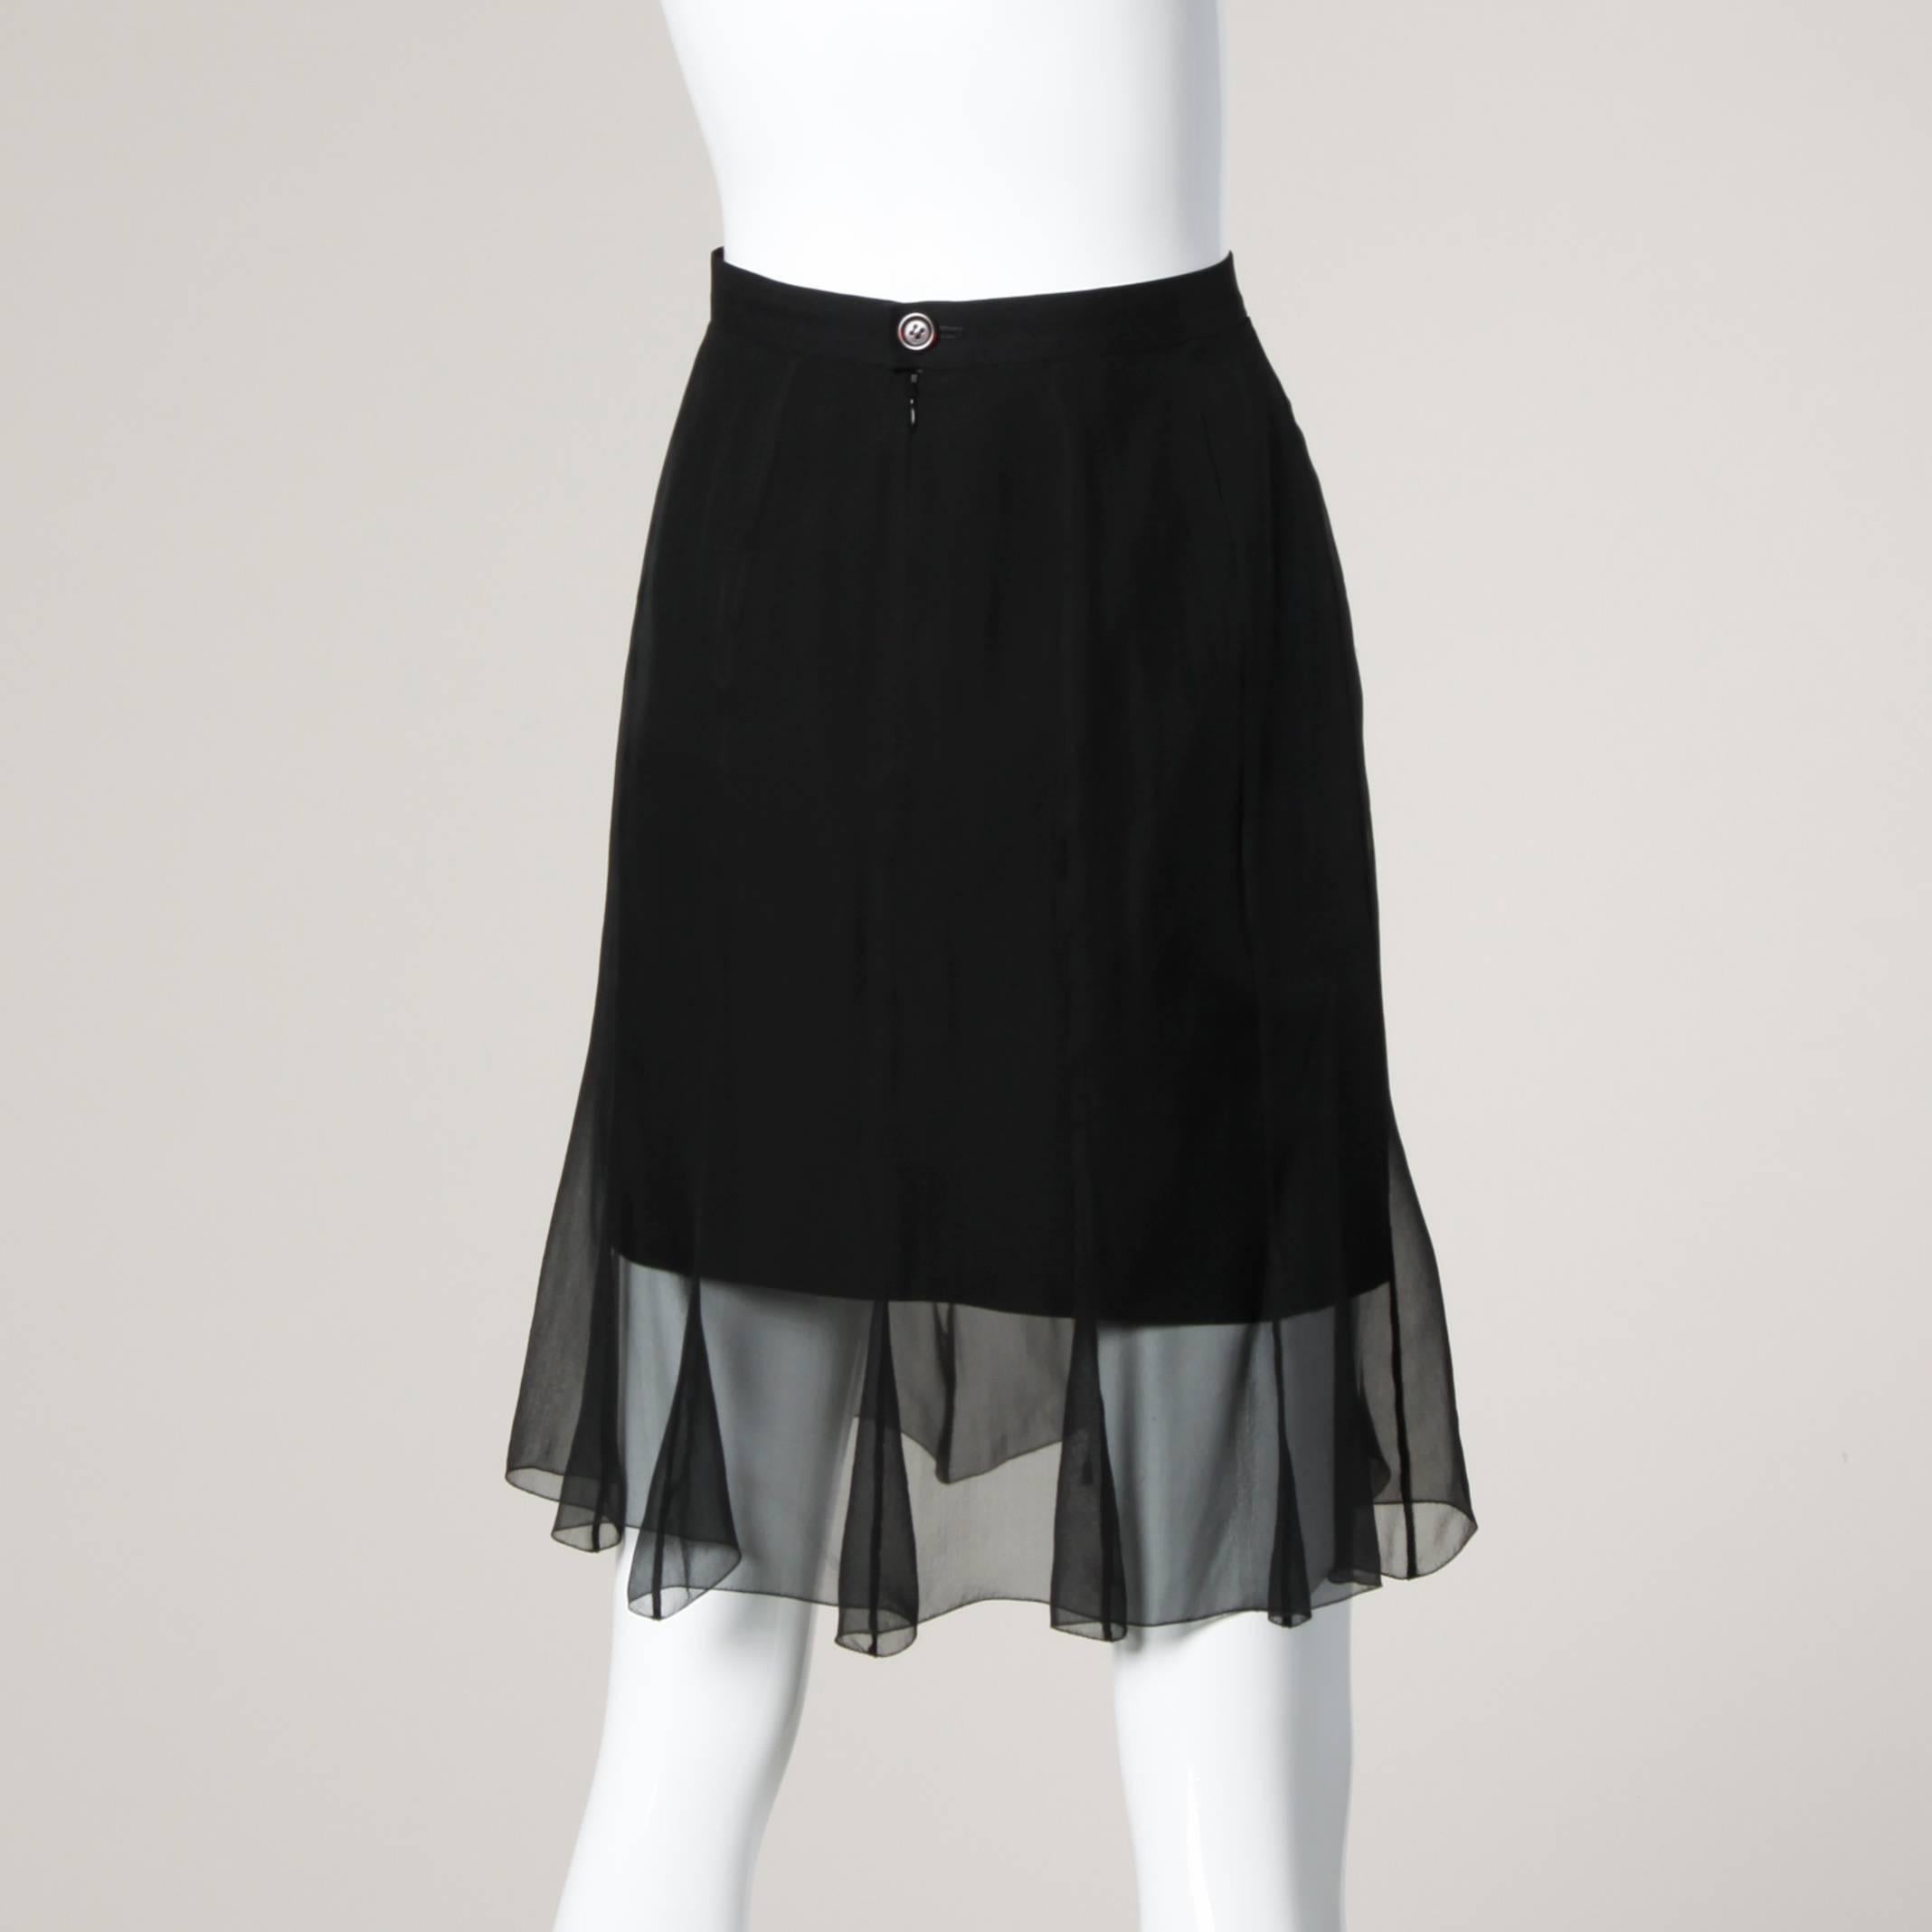 Karl Lagerfeld black skirt with a sheer mesh overlay. Simple and chic.

Details:

Fully Lined
Back Zip and Button Closure
Marked Size: 40
Estimated Size: Medium
Color: Black
Fabric: 32% Viscose/ Acetate 61%/ 7% Polyamide
Label: Karl